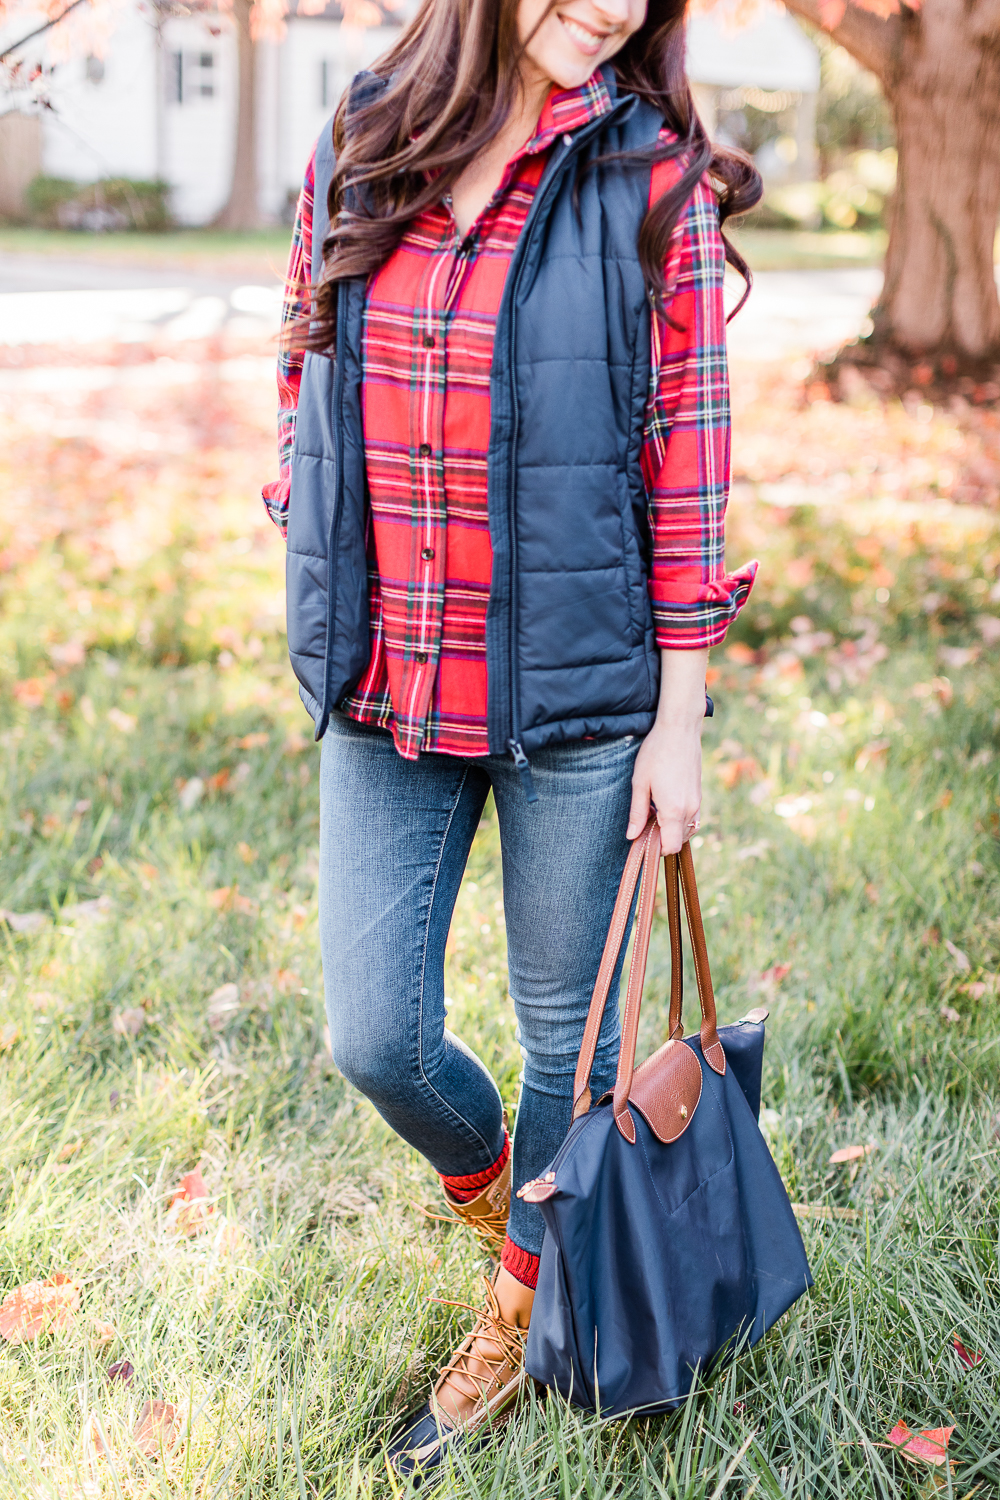 LL Bean Royal Stewart Tartan Relaxed Flannel styled with Classic Bean Boots, Navy Amazon Essentials Puffer Vest, AG Ankle Skinny Jeans, and a Navy Longchamp Le Pliage Tote by popular affordable fashion blogger Stephanie Ziajka on Diary of a Debutante, best LL Bean purchases, favorite LL Bean winter fashion finds 